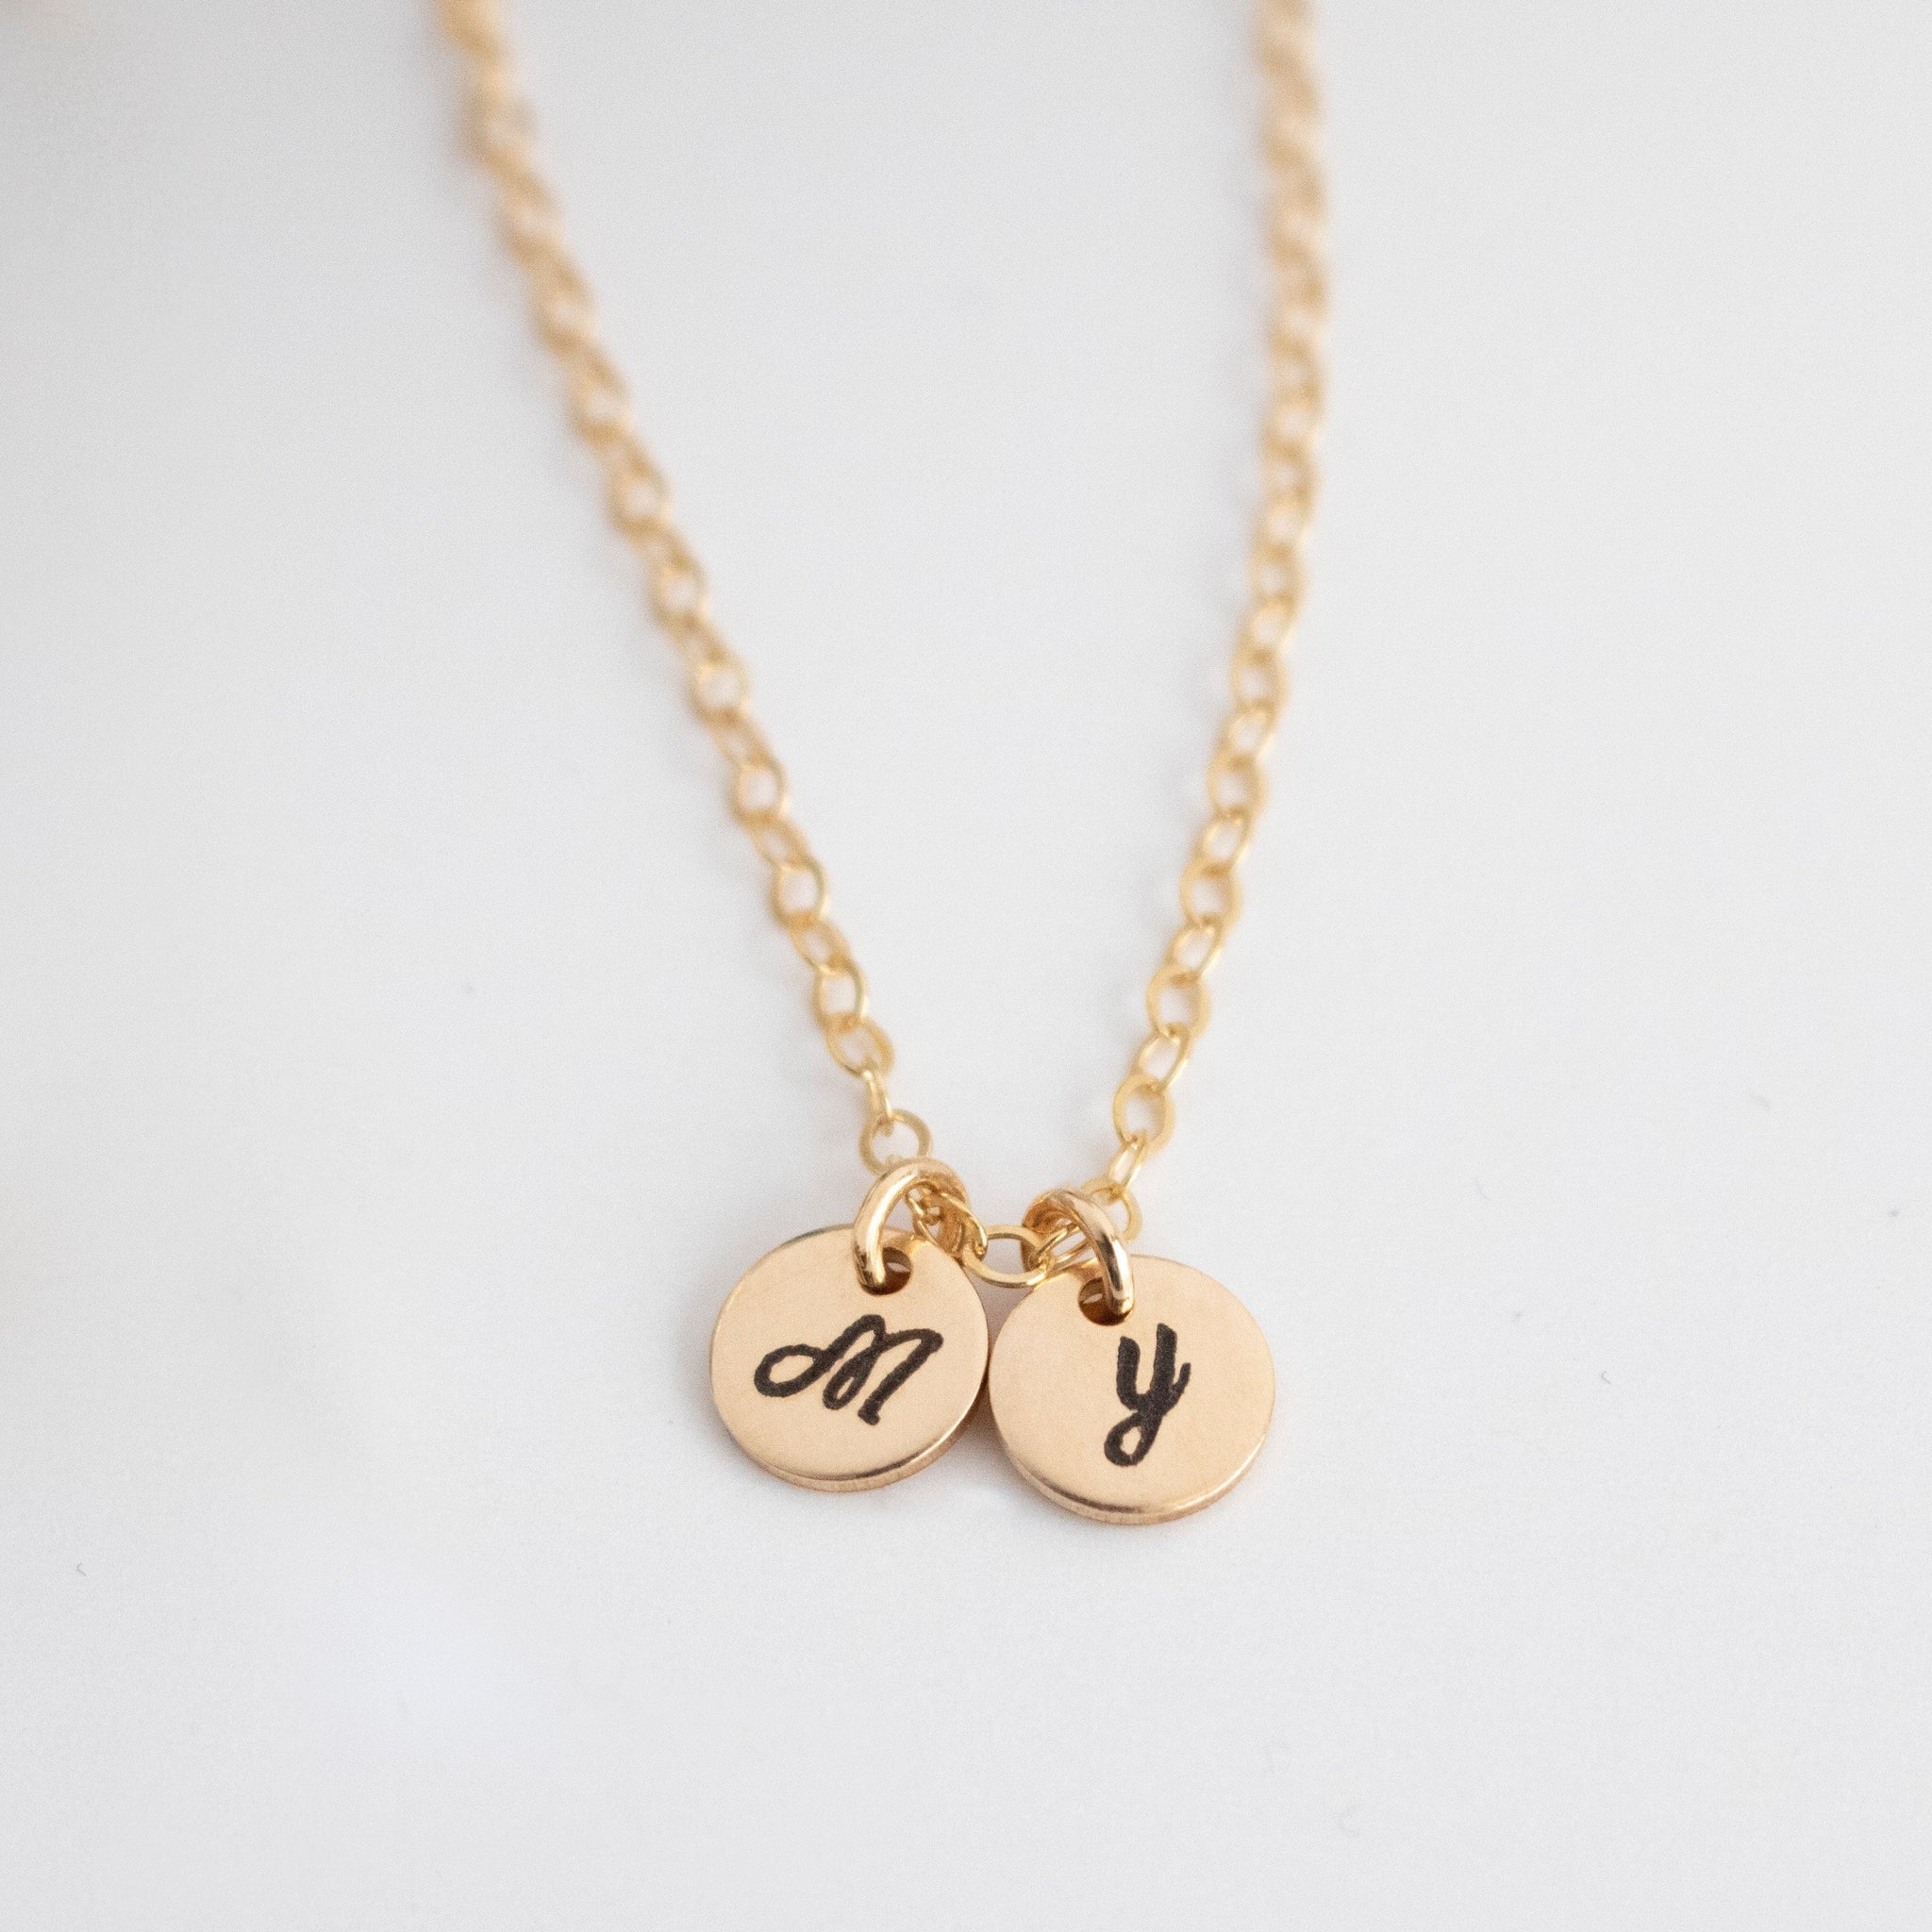 Tiny initial necklace letter - push present - Tiny Initial Tags - 14k gold filled letter - 14k gold letter